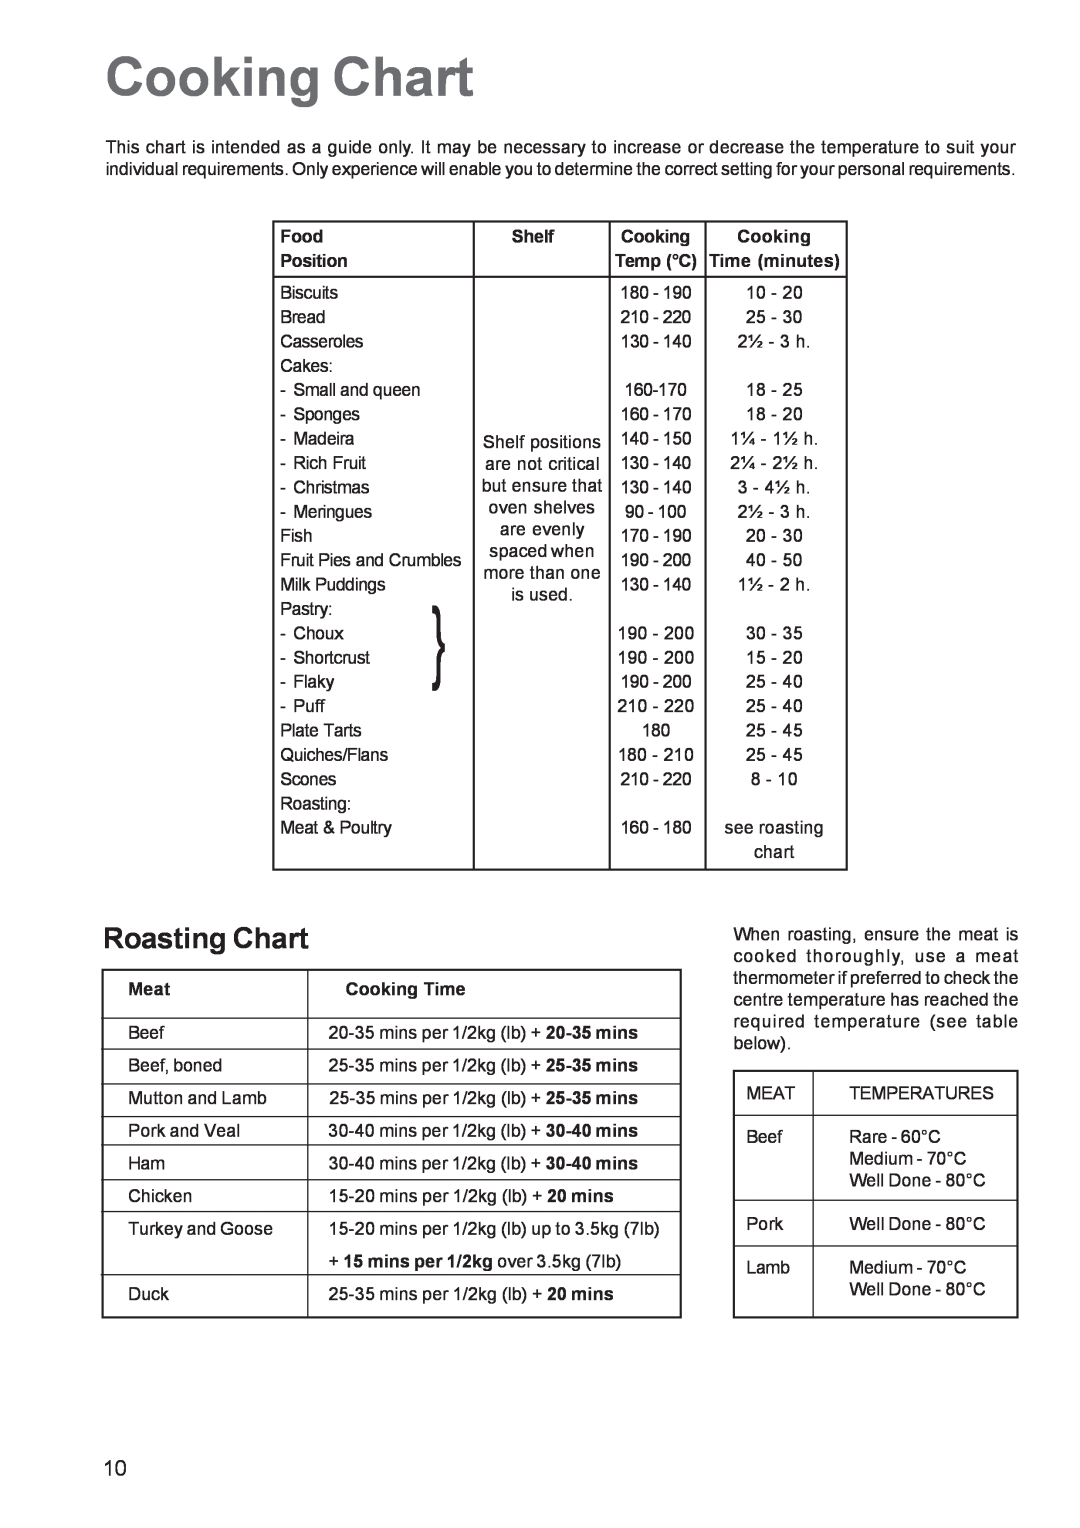 Zanussi ZCE 641, ZCE 640 manual Cooking Chart, Roasting Chart, Food, Shelf, Position, Time minutes, Meat, Cooking Time 